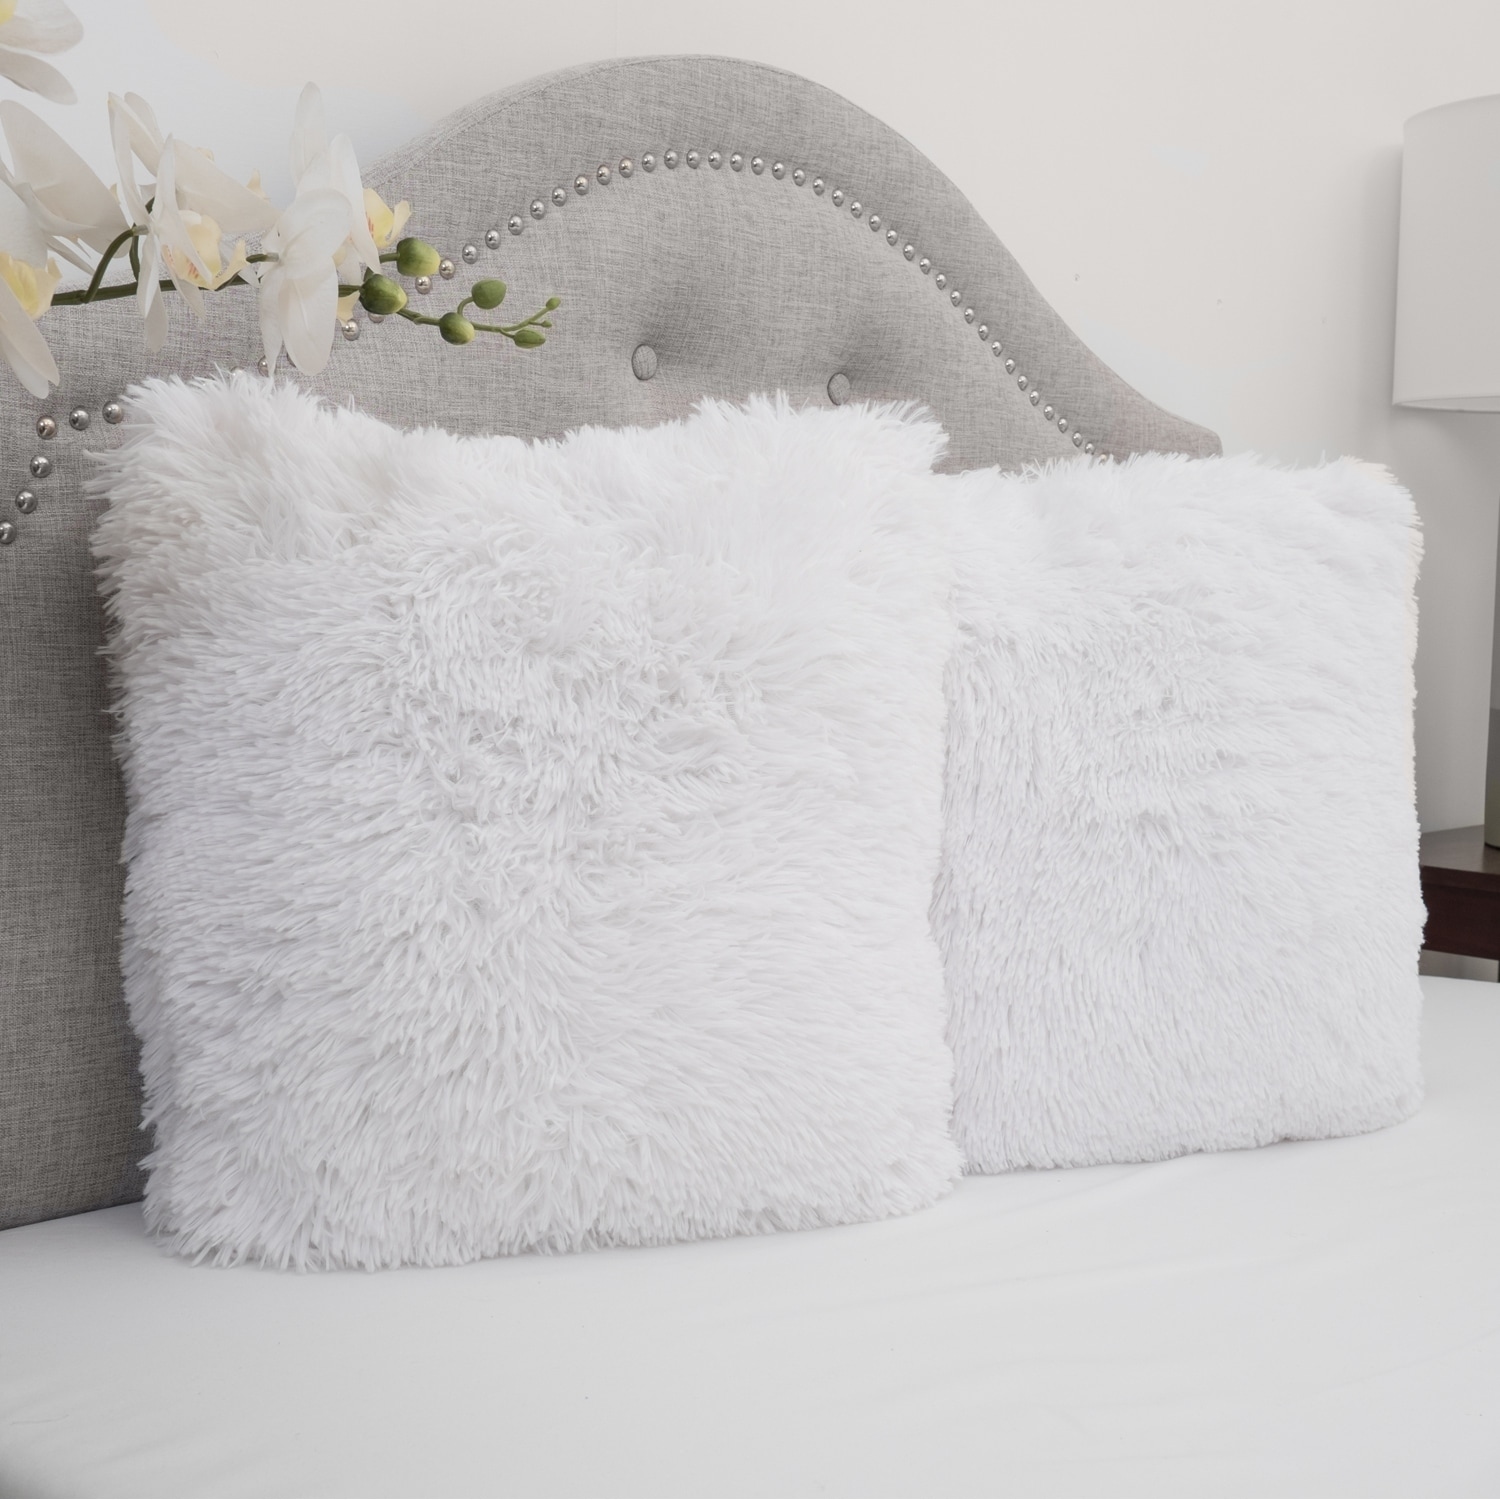 Grey And White Decorative Pillows